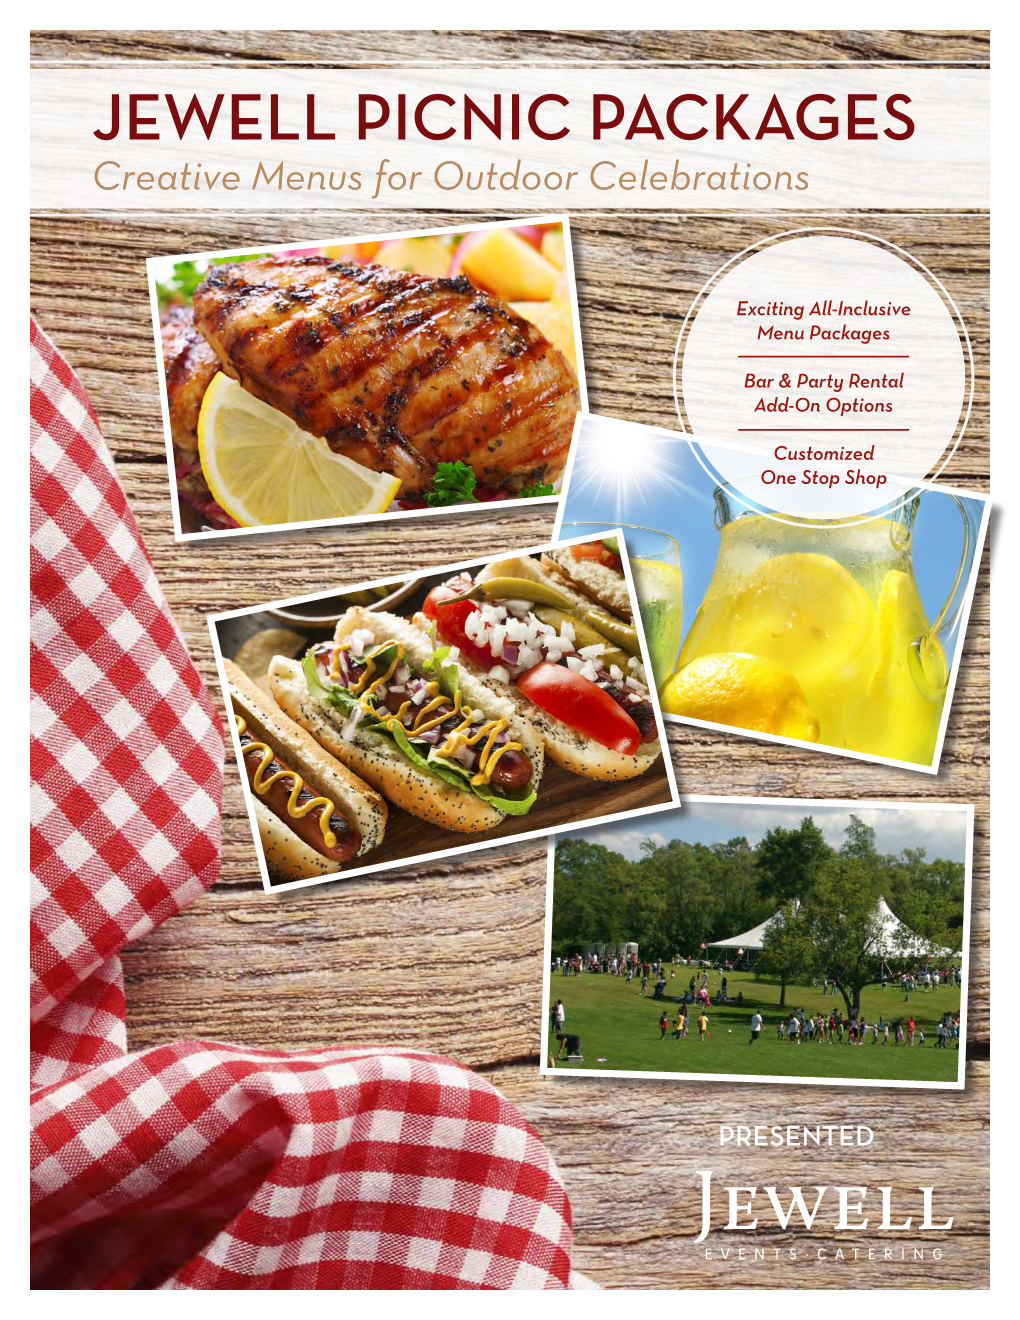 JEWELL PICNIC PACKAGES Creative Menus for Outdoor Celebrations